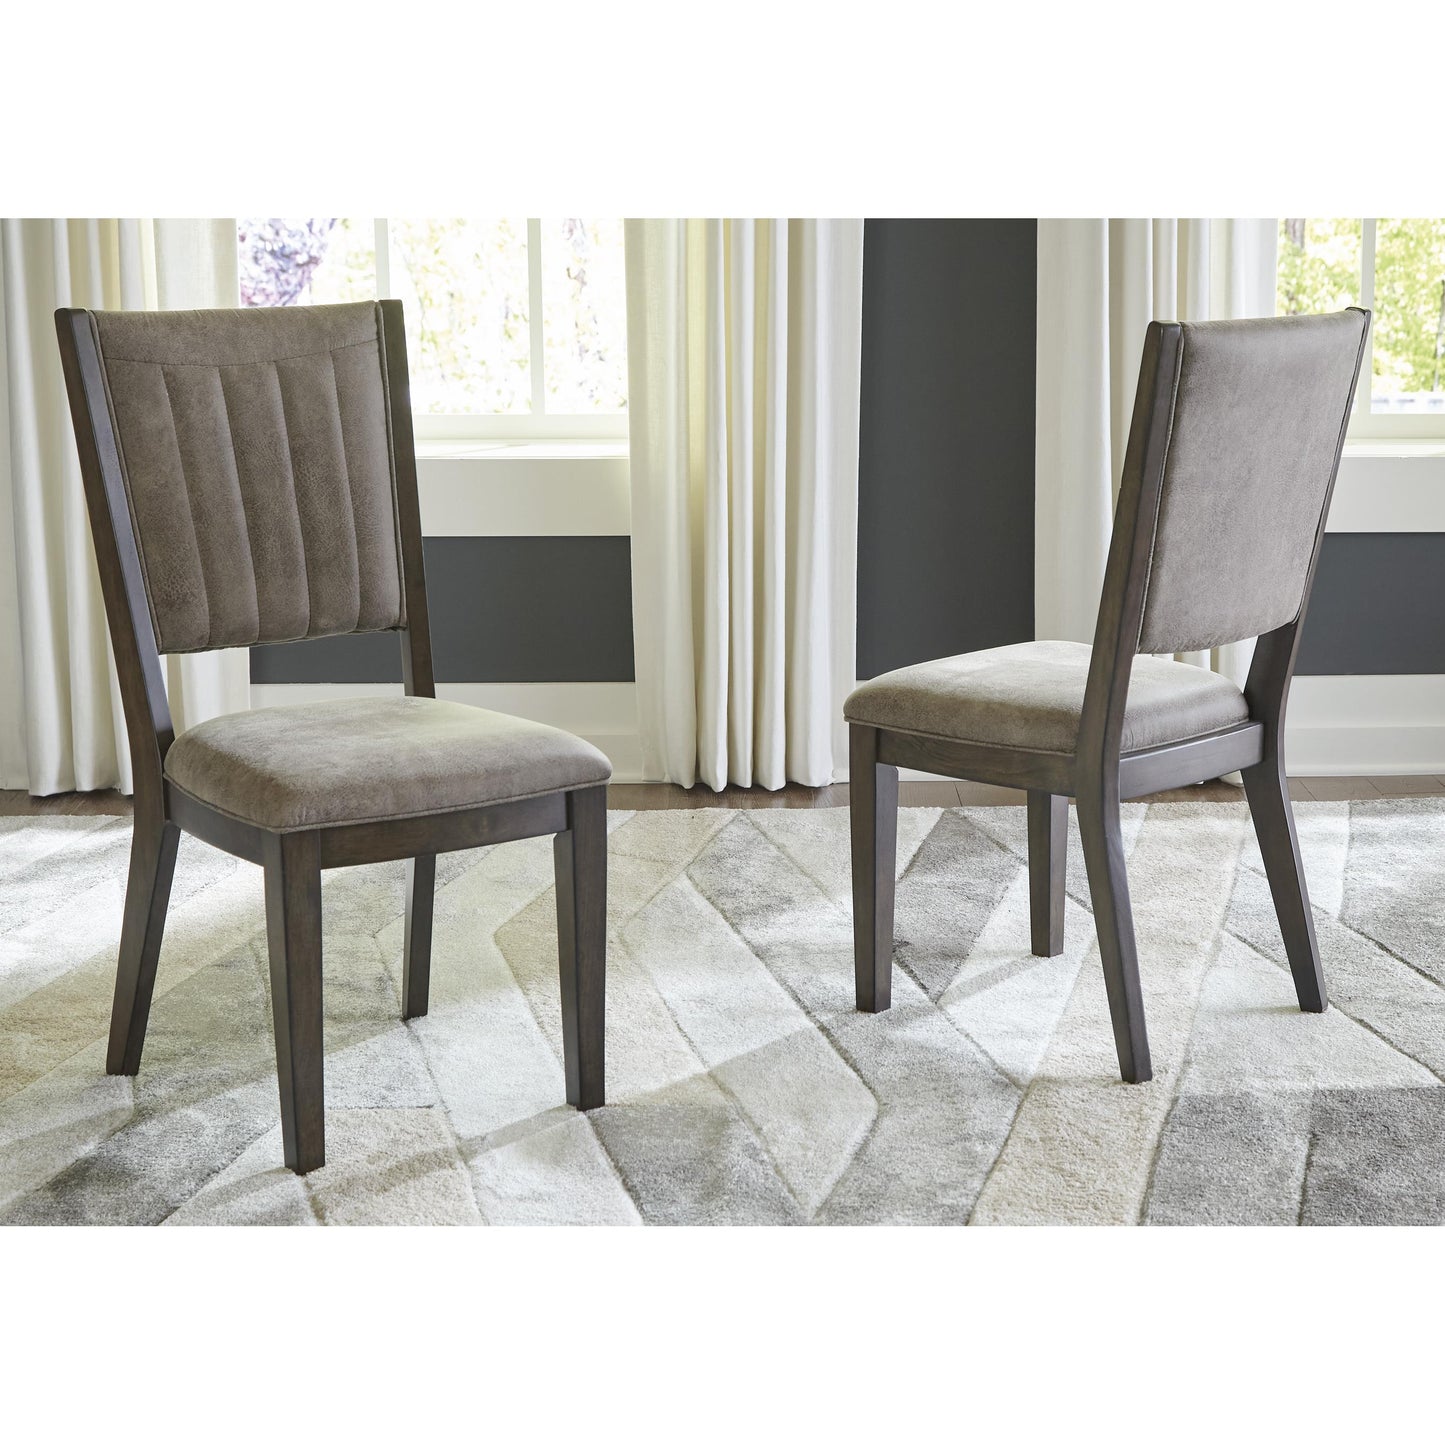 Signature Design by Ashley Wittland Dining Chair D374-01